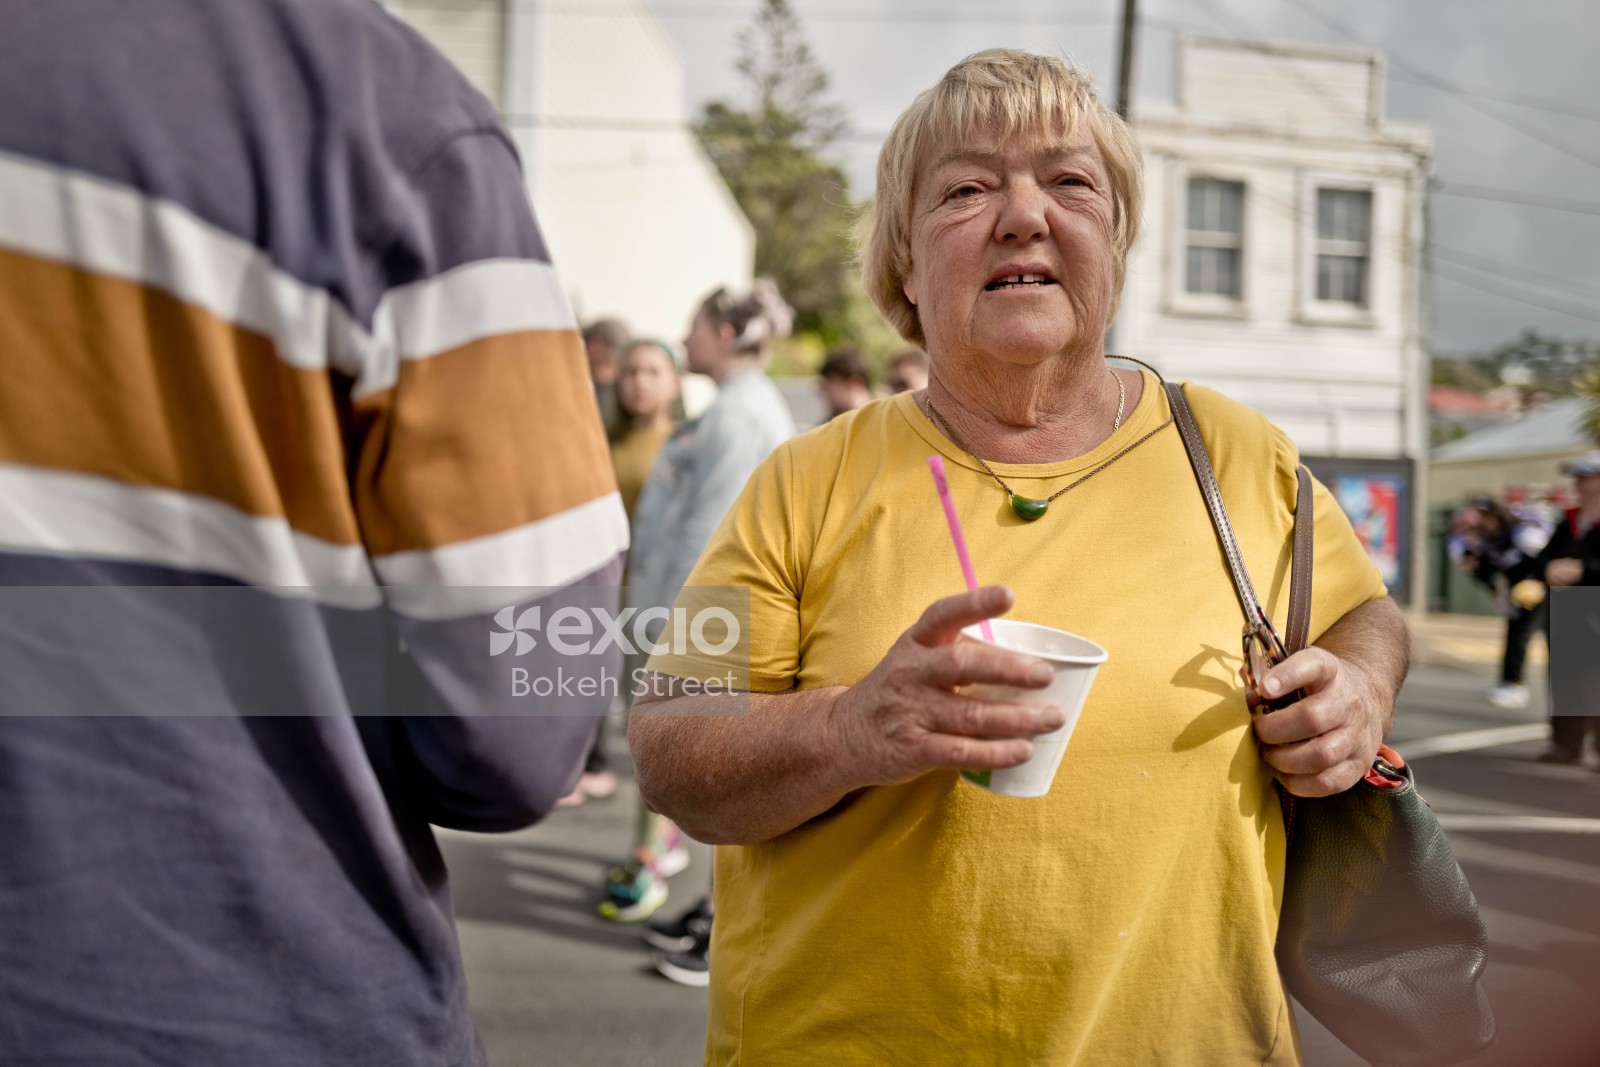 Old lady wearing a yellow shirt holding a cup at Newtown festival 2021